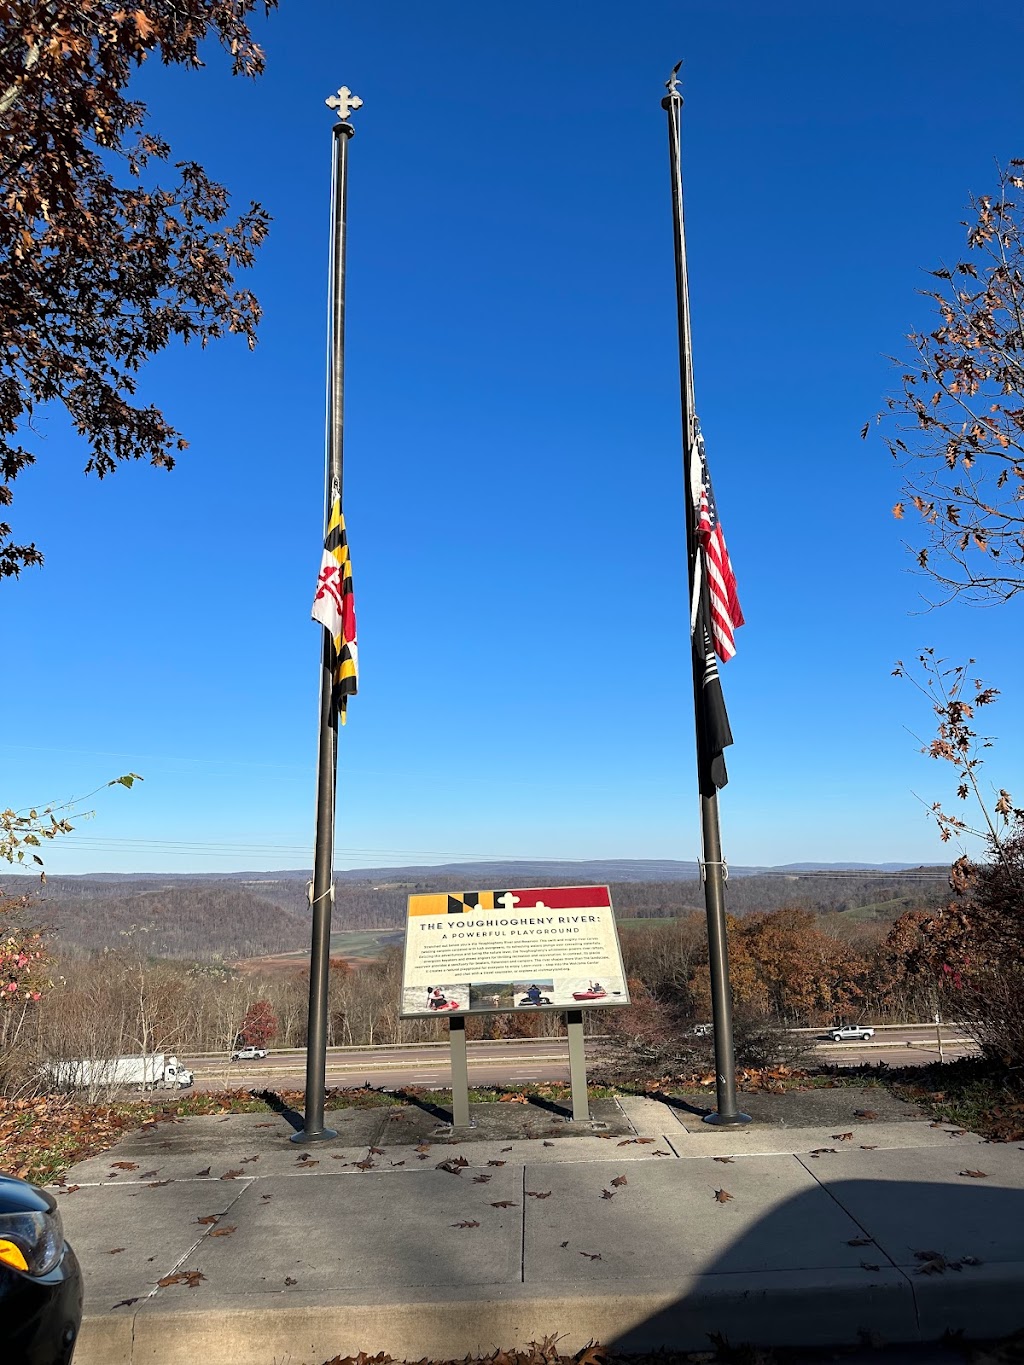 Youghiogheny Overlook Welcome Center | I-68 Eastbound, MM#6, I-68, Friendsville, MD 21531, USA | Phone: (301) 746-5230